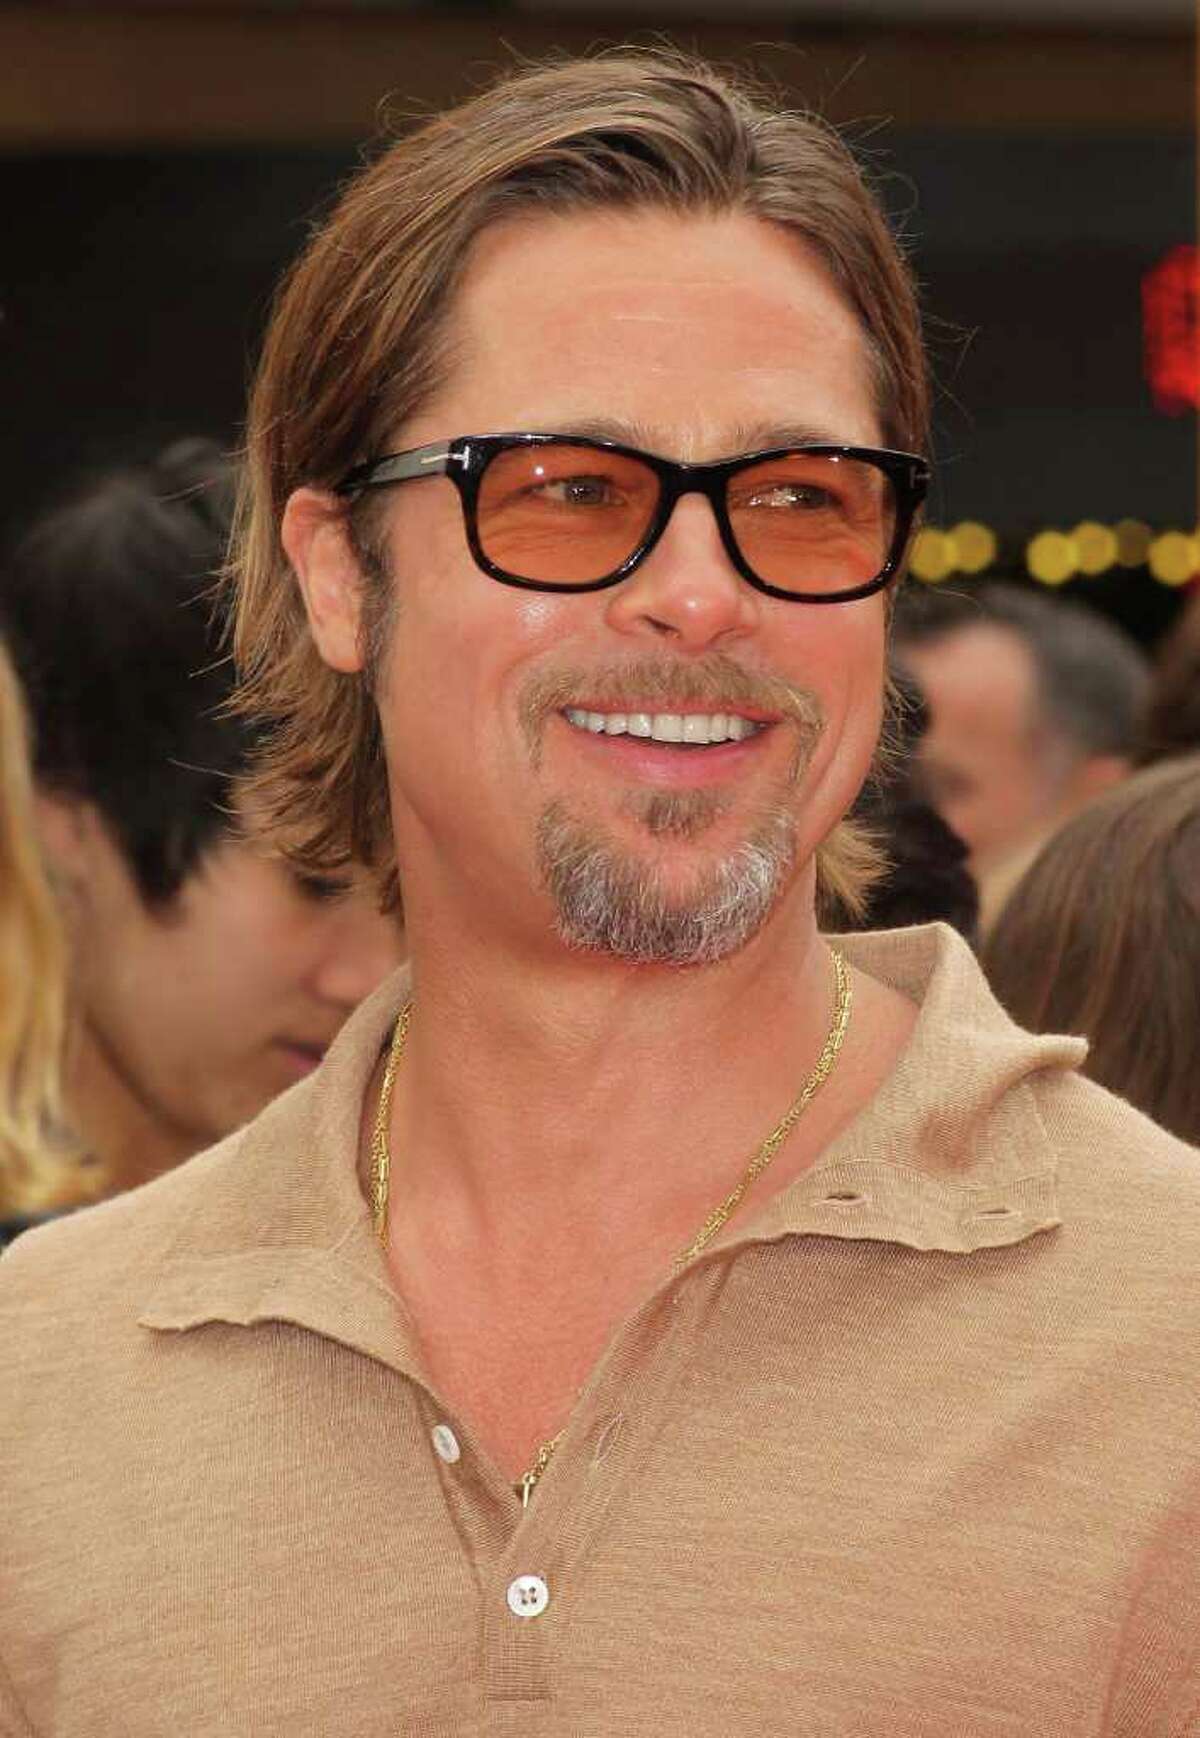 Actor Brad Pitt attends the Premiere of DreamWorks Animation's "Kung Fu Panda 2" at Mann's Chinese Theatre in Hollywood, California.